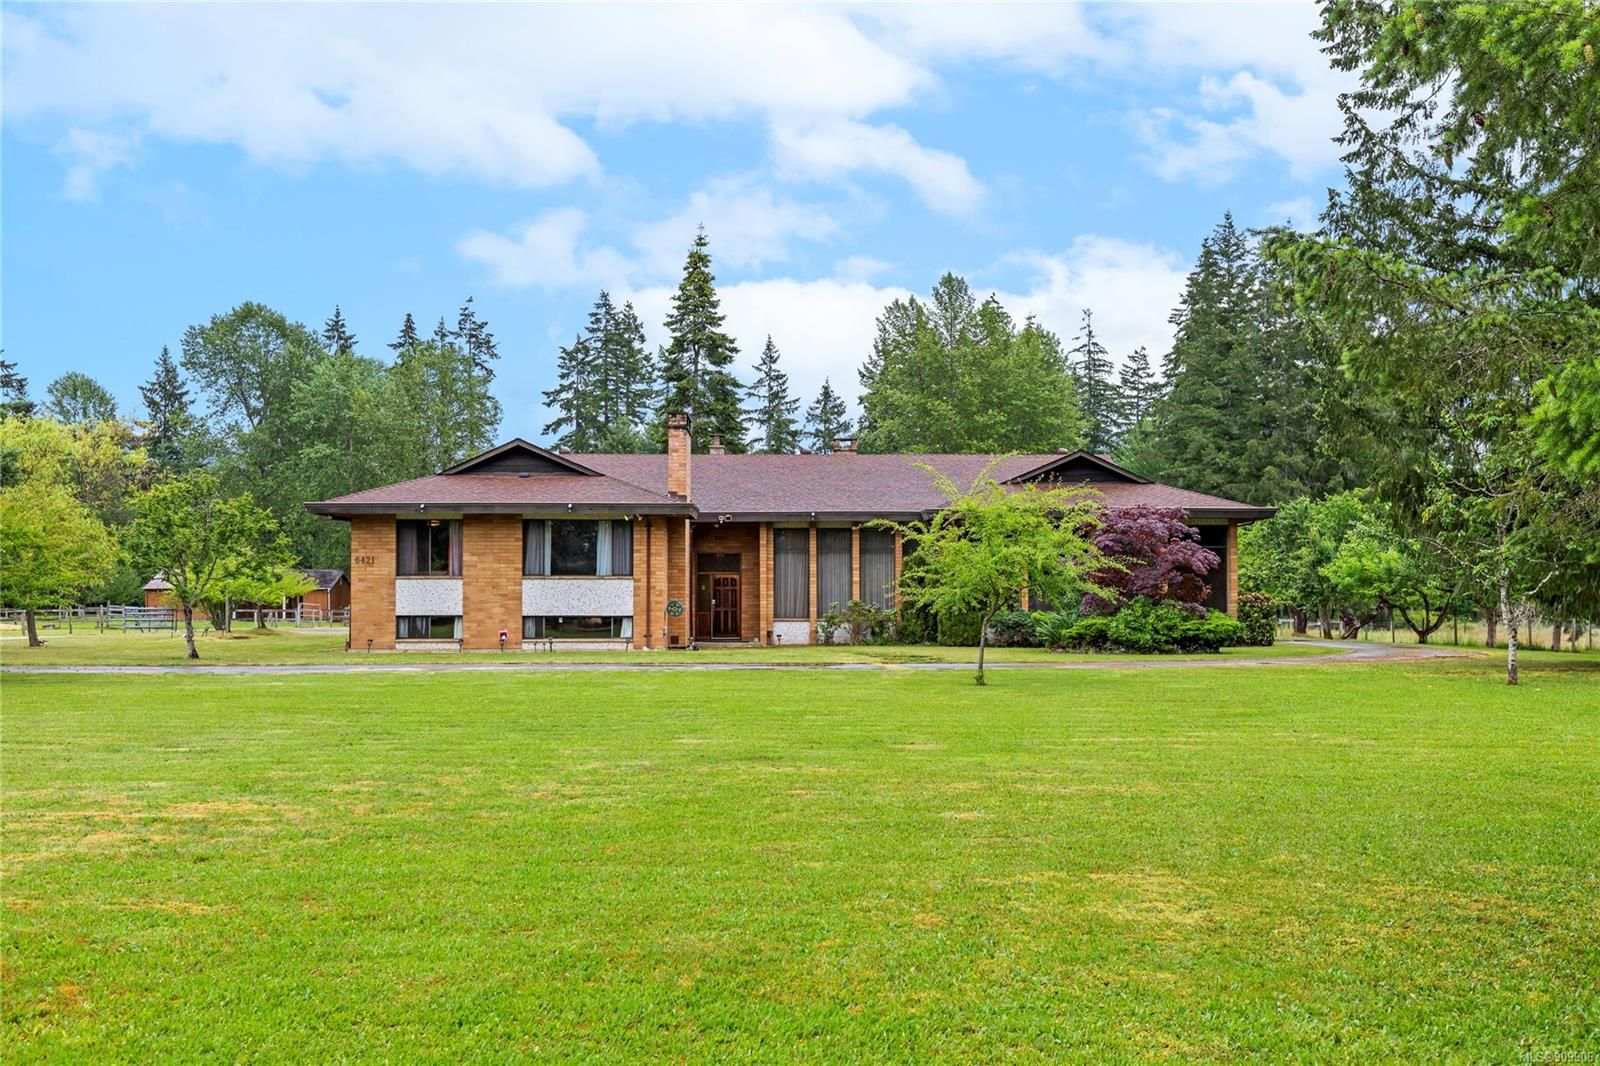 I have sold a property at 6421 Lamarque Rd in Port Alberni
